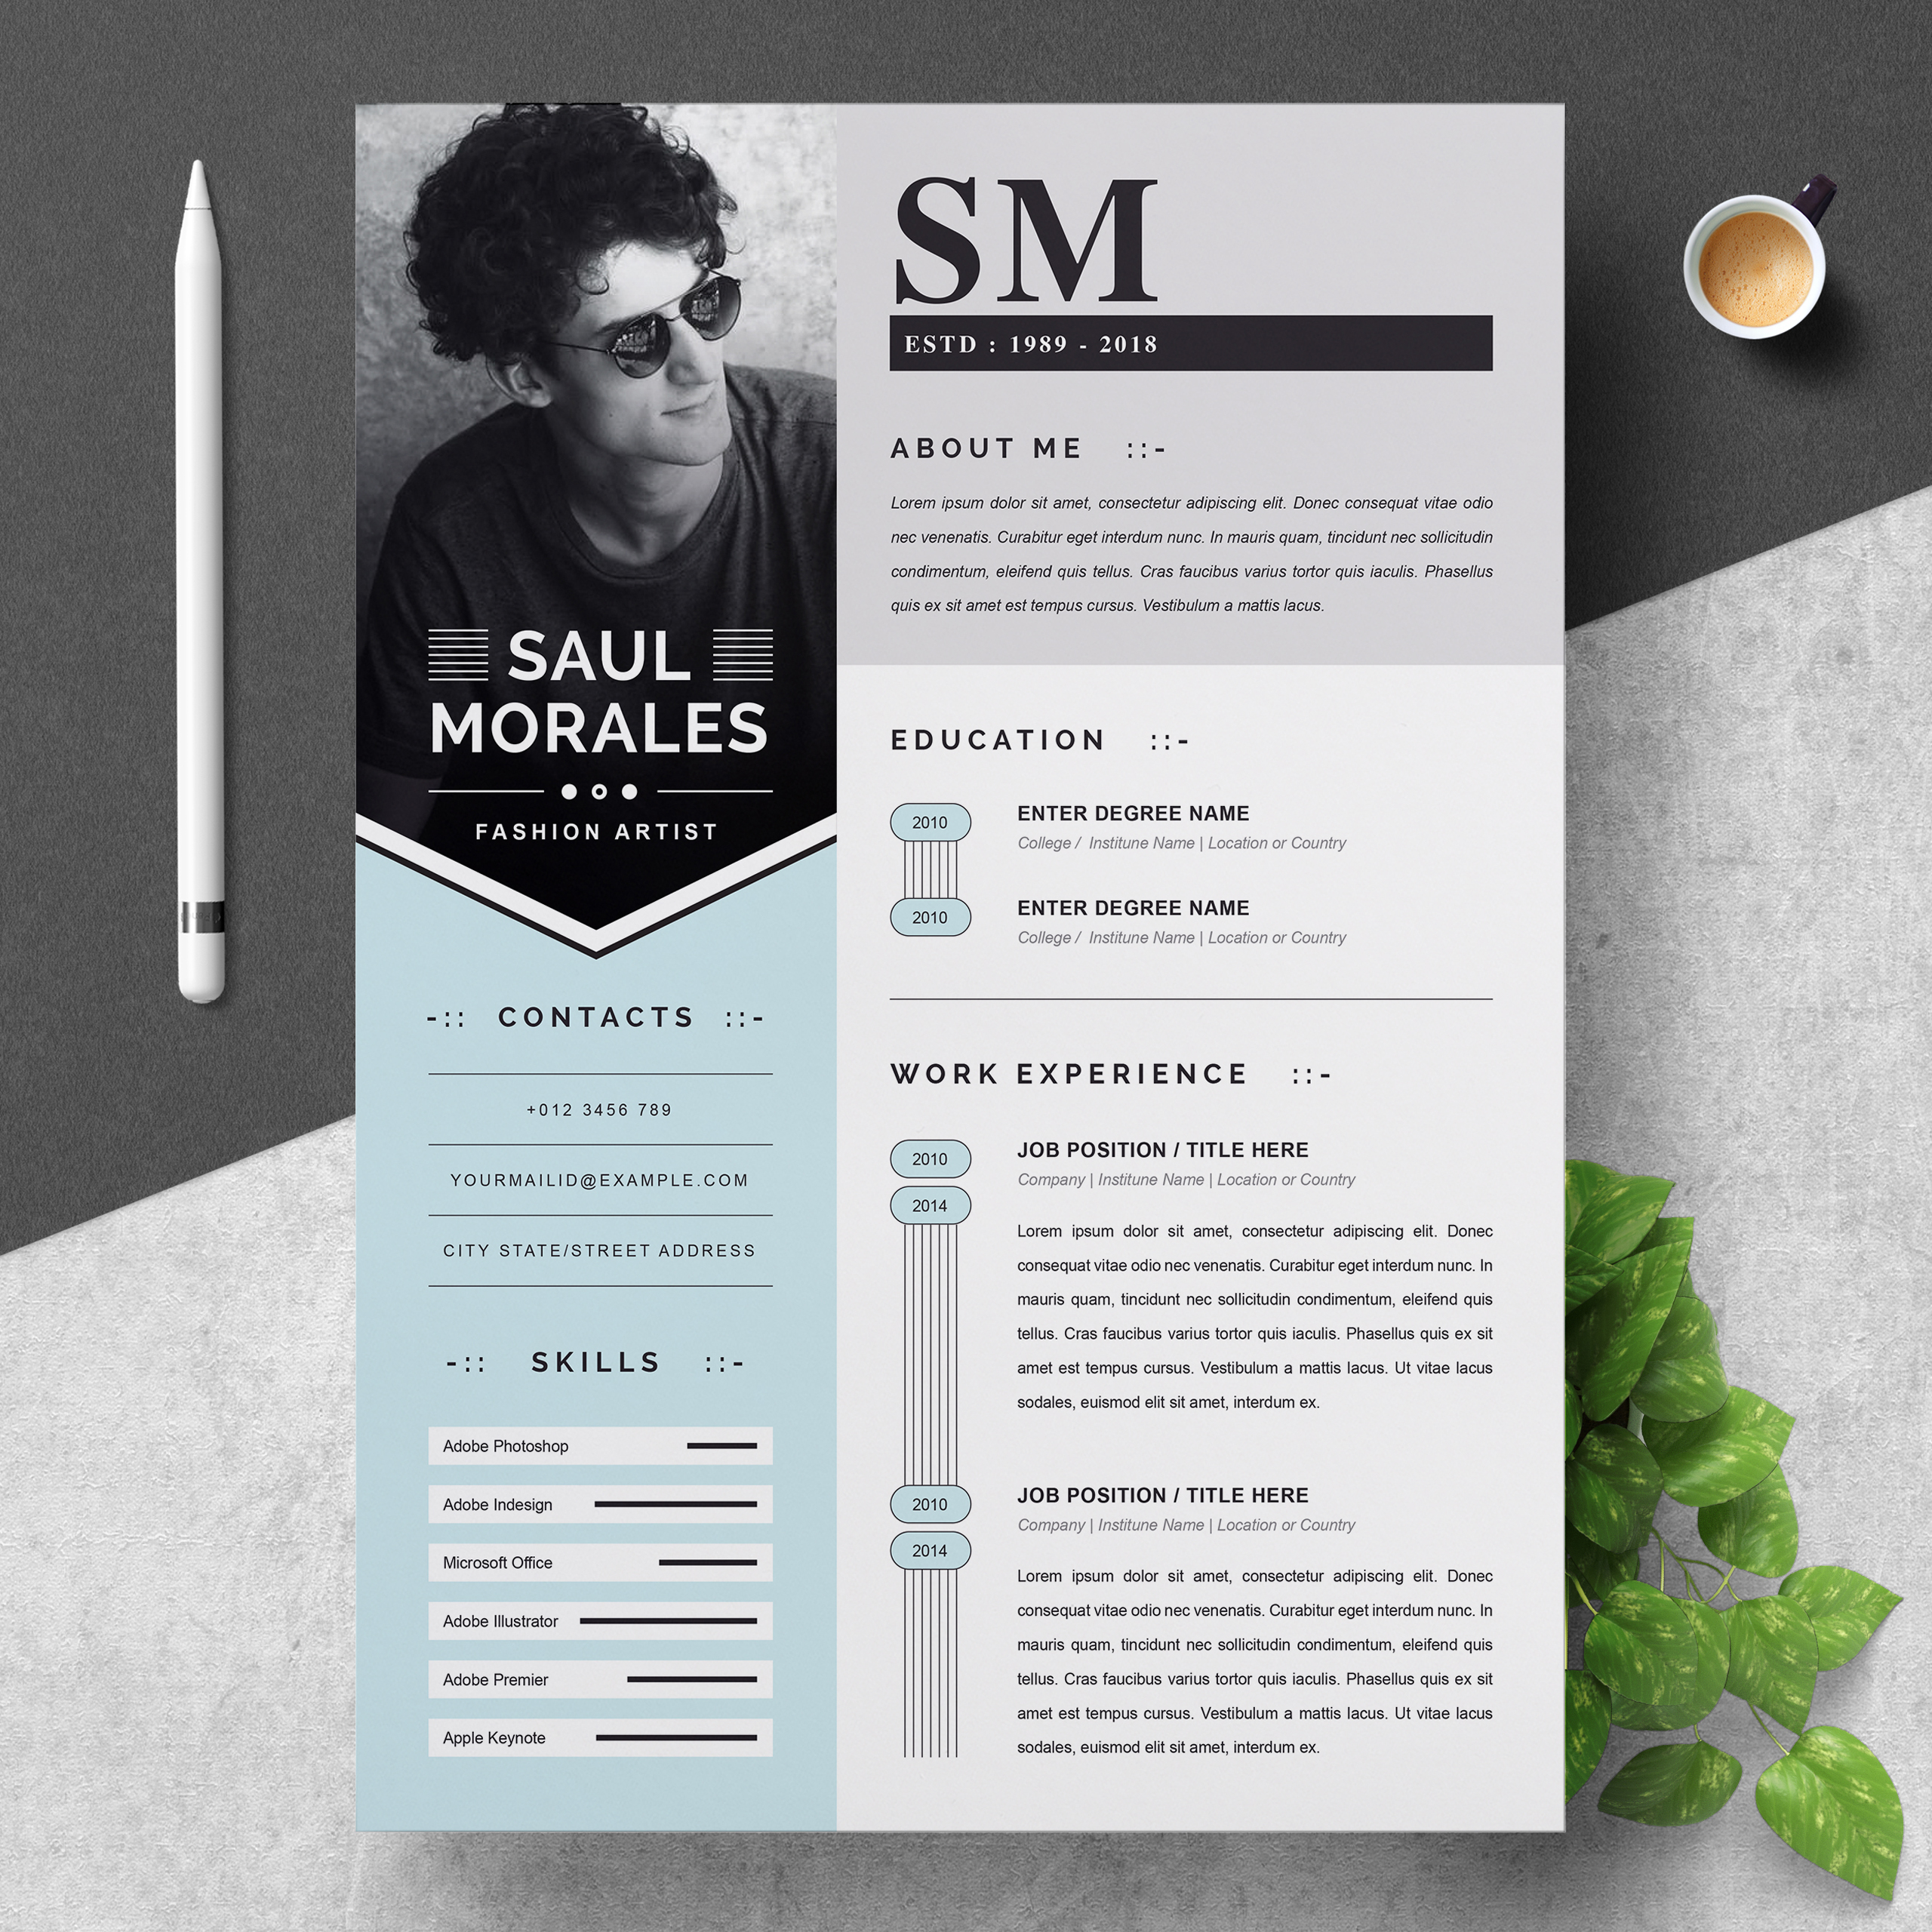 Creative Resume Template Free 1860567 1558599483352 01 Clean Professional Creative And Modern Resume Cv Curriculum Vitae Design Template Ms Word Apple Pages Psd Free Download creative resume template free|wikiresume.com